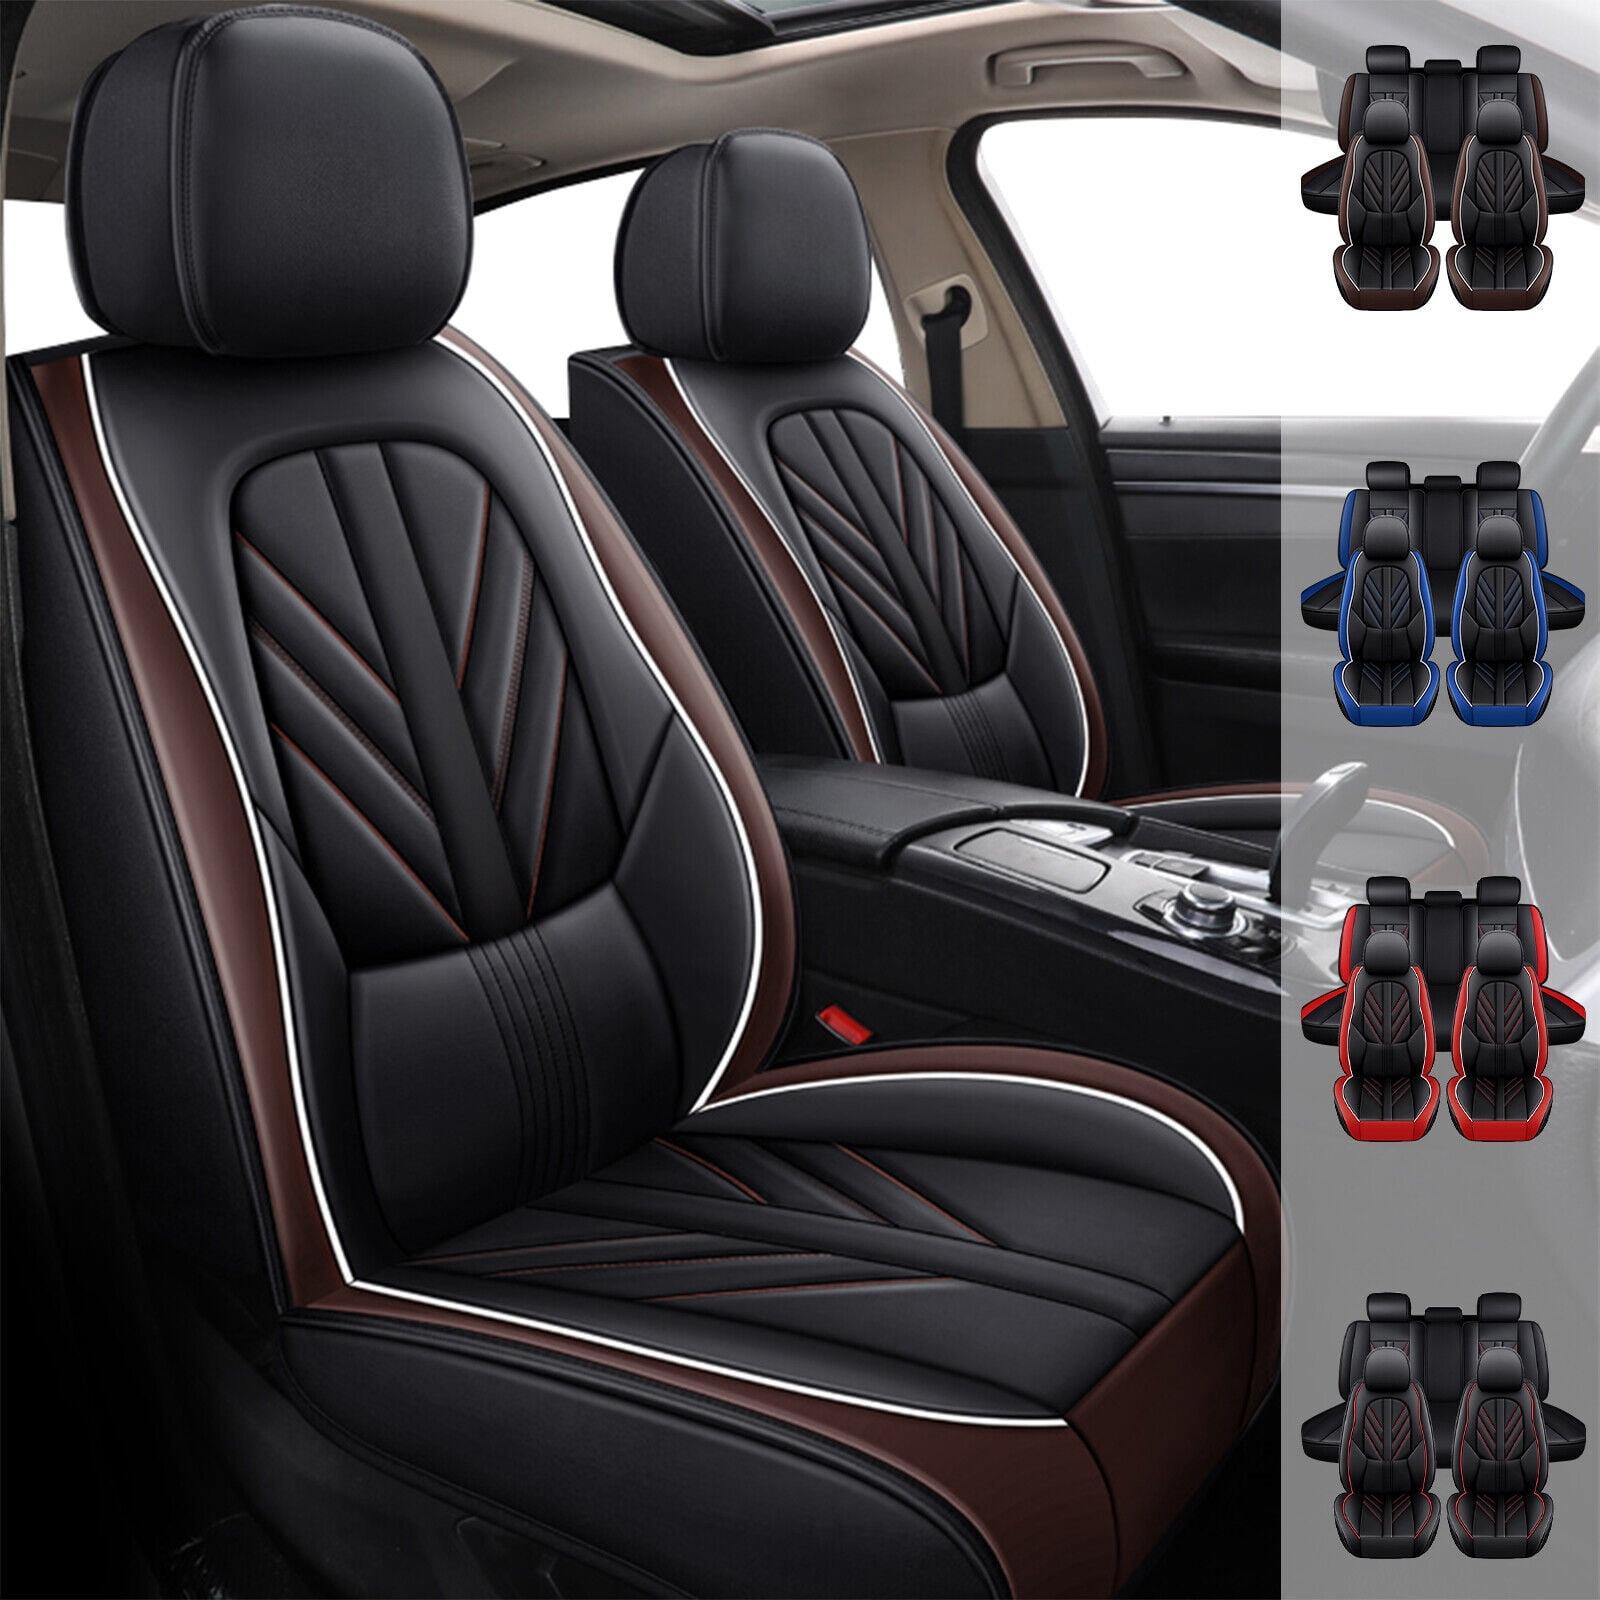 For Lexus Car Seat Cover, Premium 5-Seat Leather Auto Seat Protector, Front  Rear Full Set for ES250 IS500 LX600/ RX350 NX250 NX350 LS460 GS350